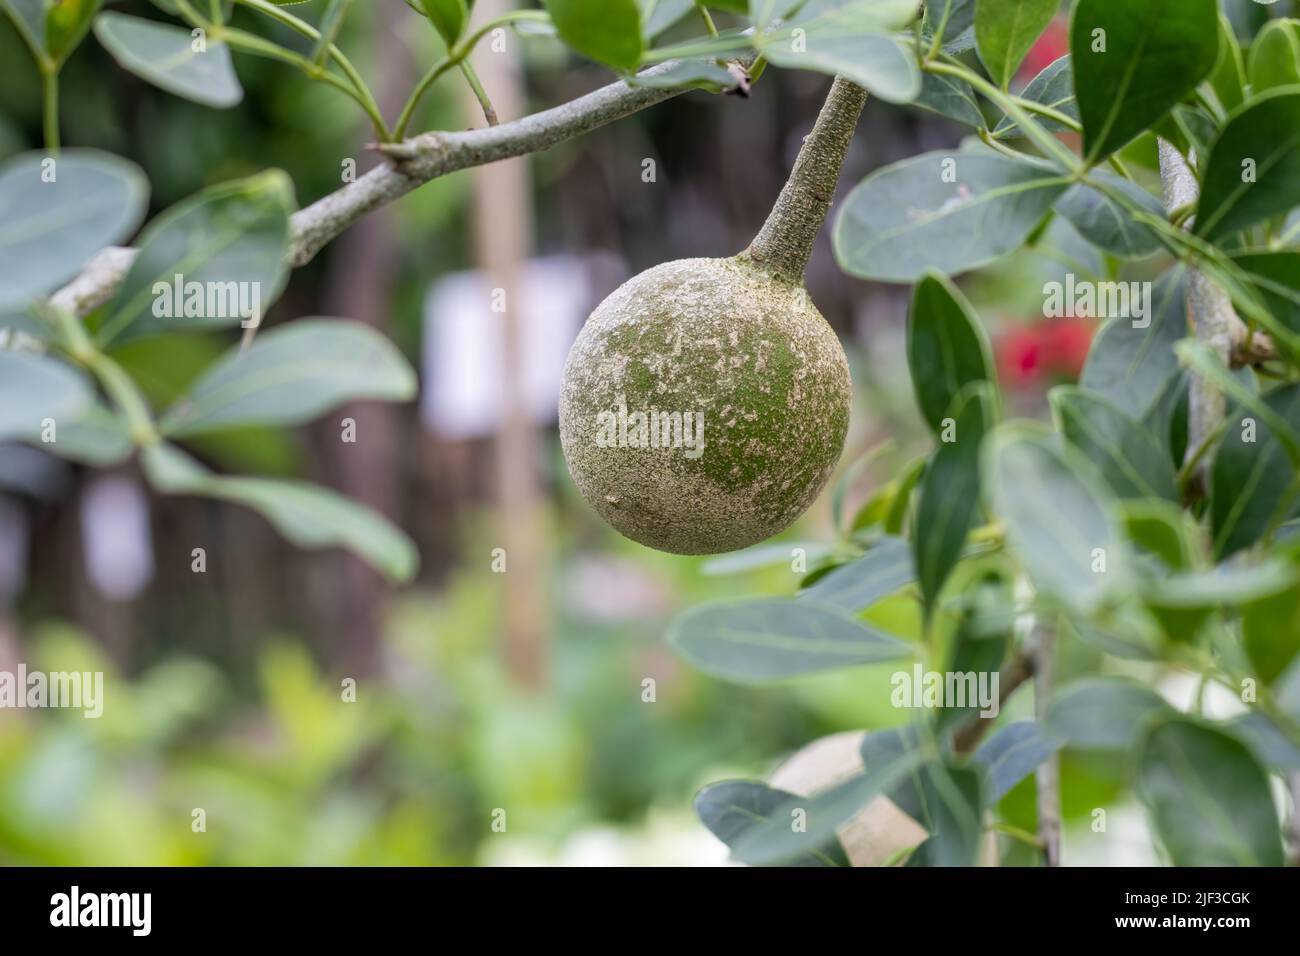 Limonia acidissima fruit or wood apple growing on a branch close up with copy space Stock Photo